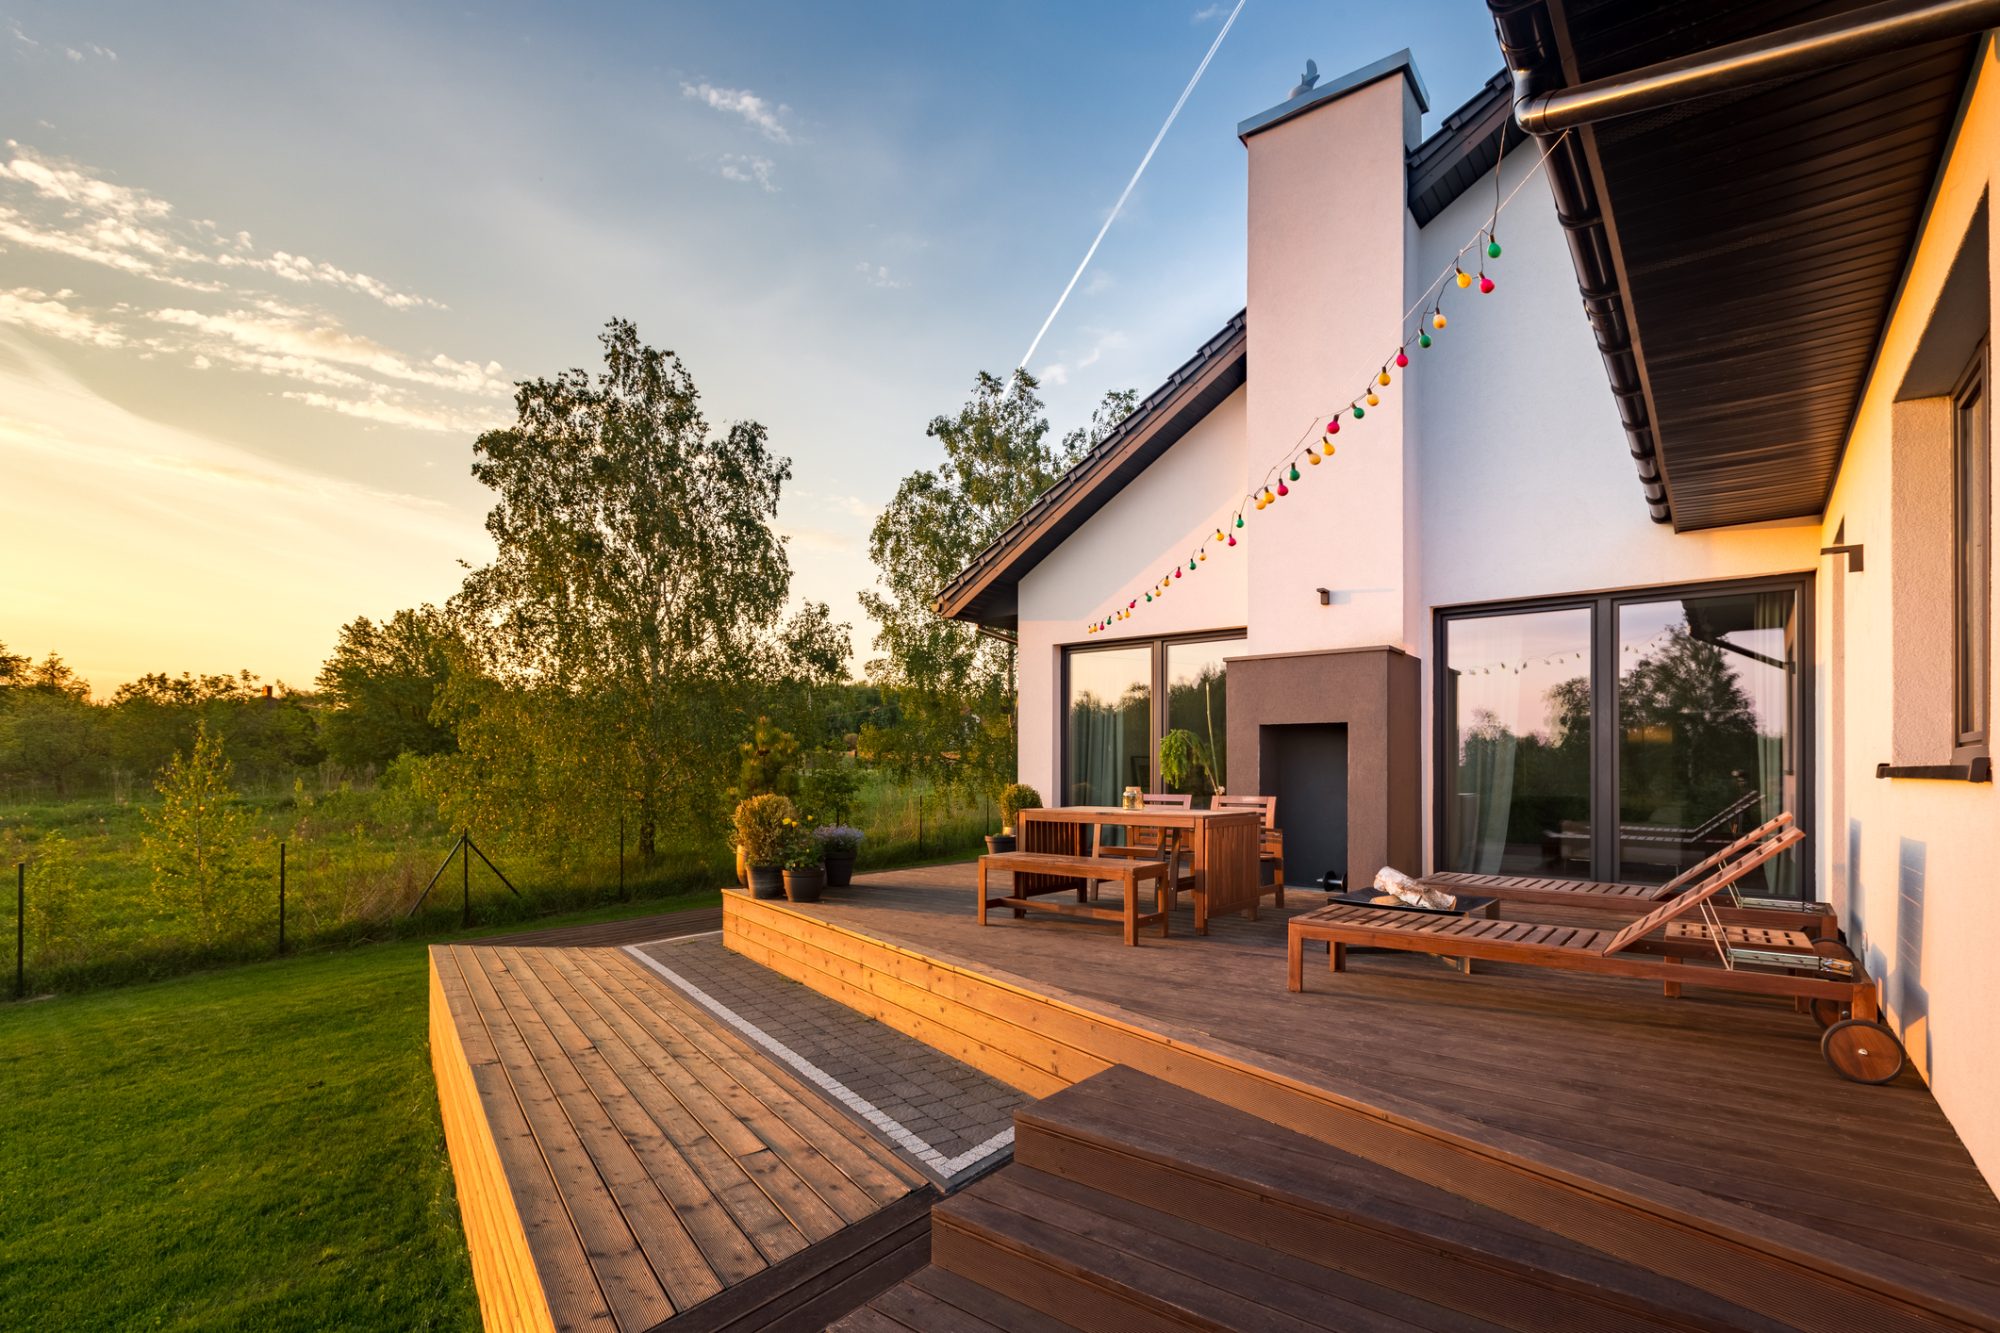 Modern house with patio and functional outdoor furniture, during sunset